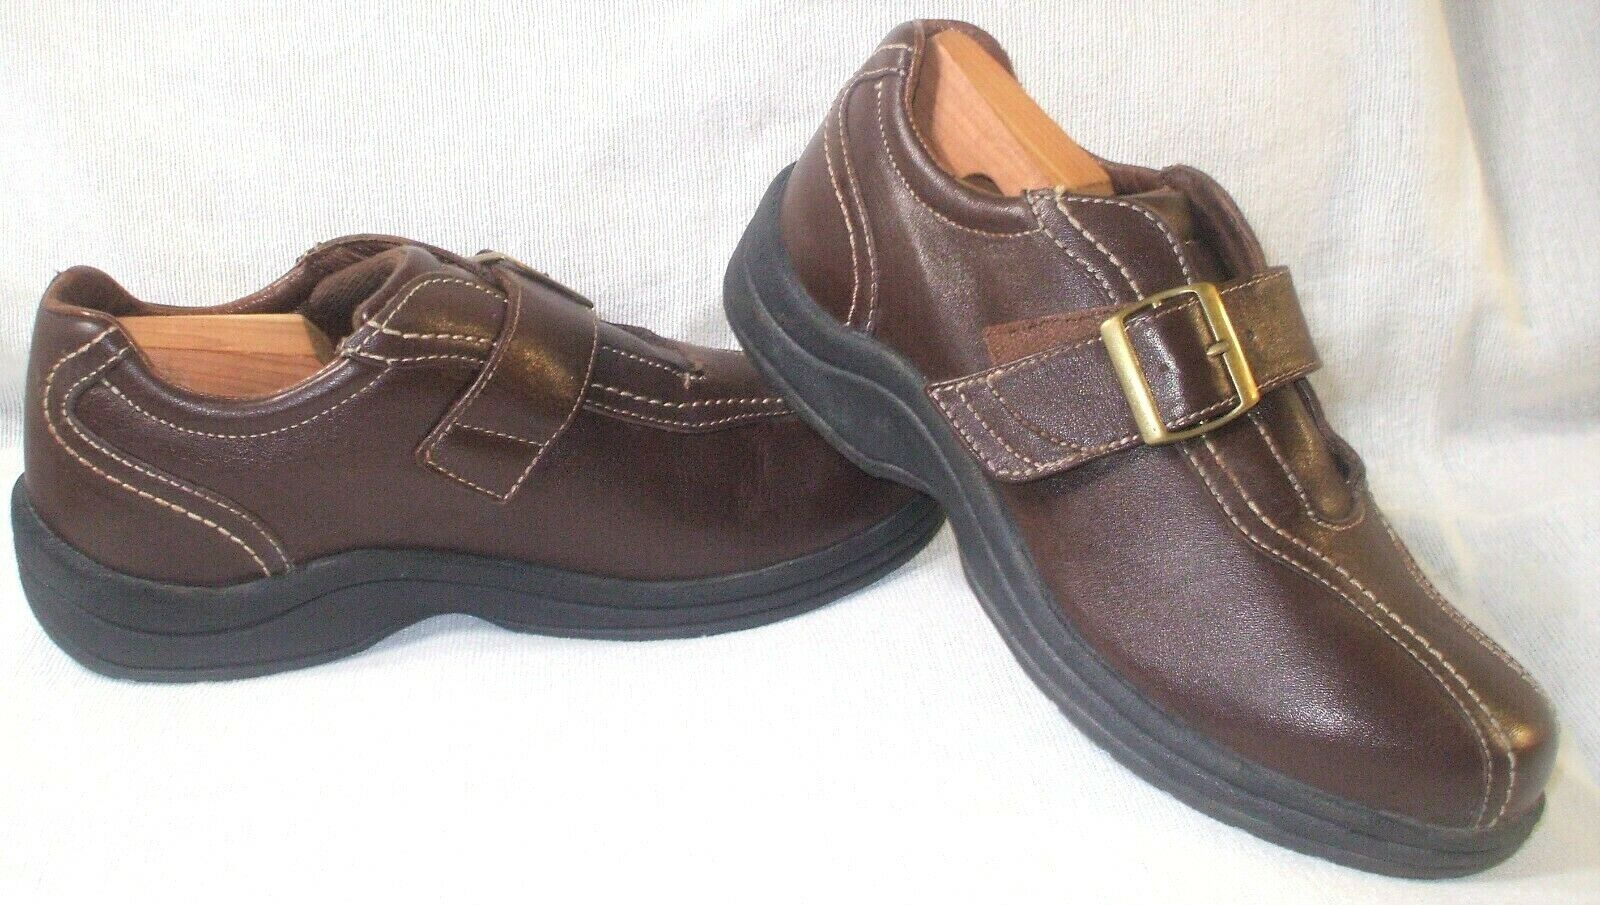 P.W. Minor Times Square Wicket Diabetic Ortho Walking Shoes Woman's 7 1/2W